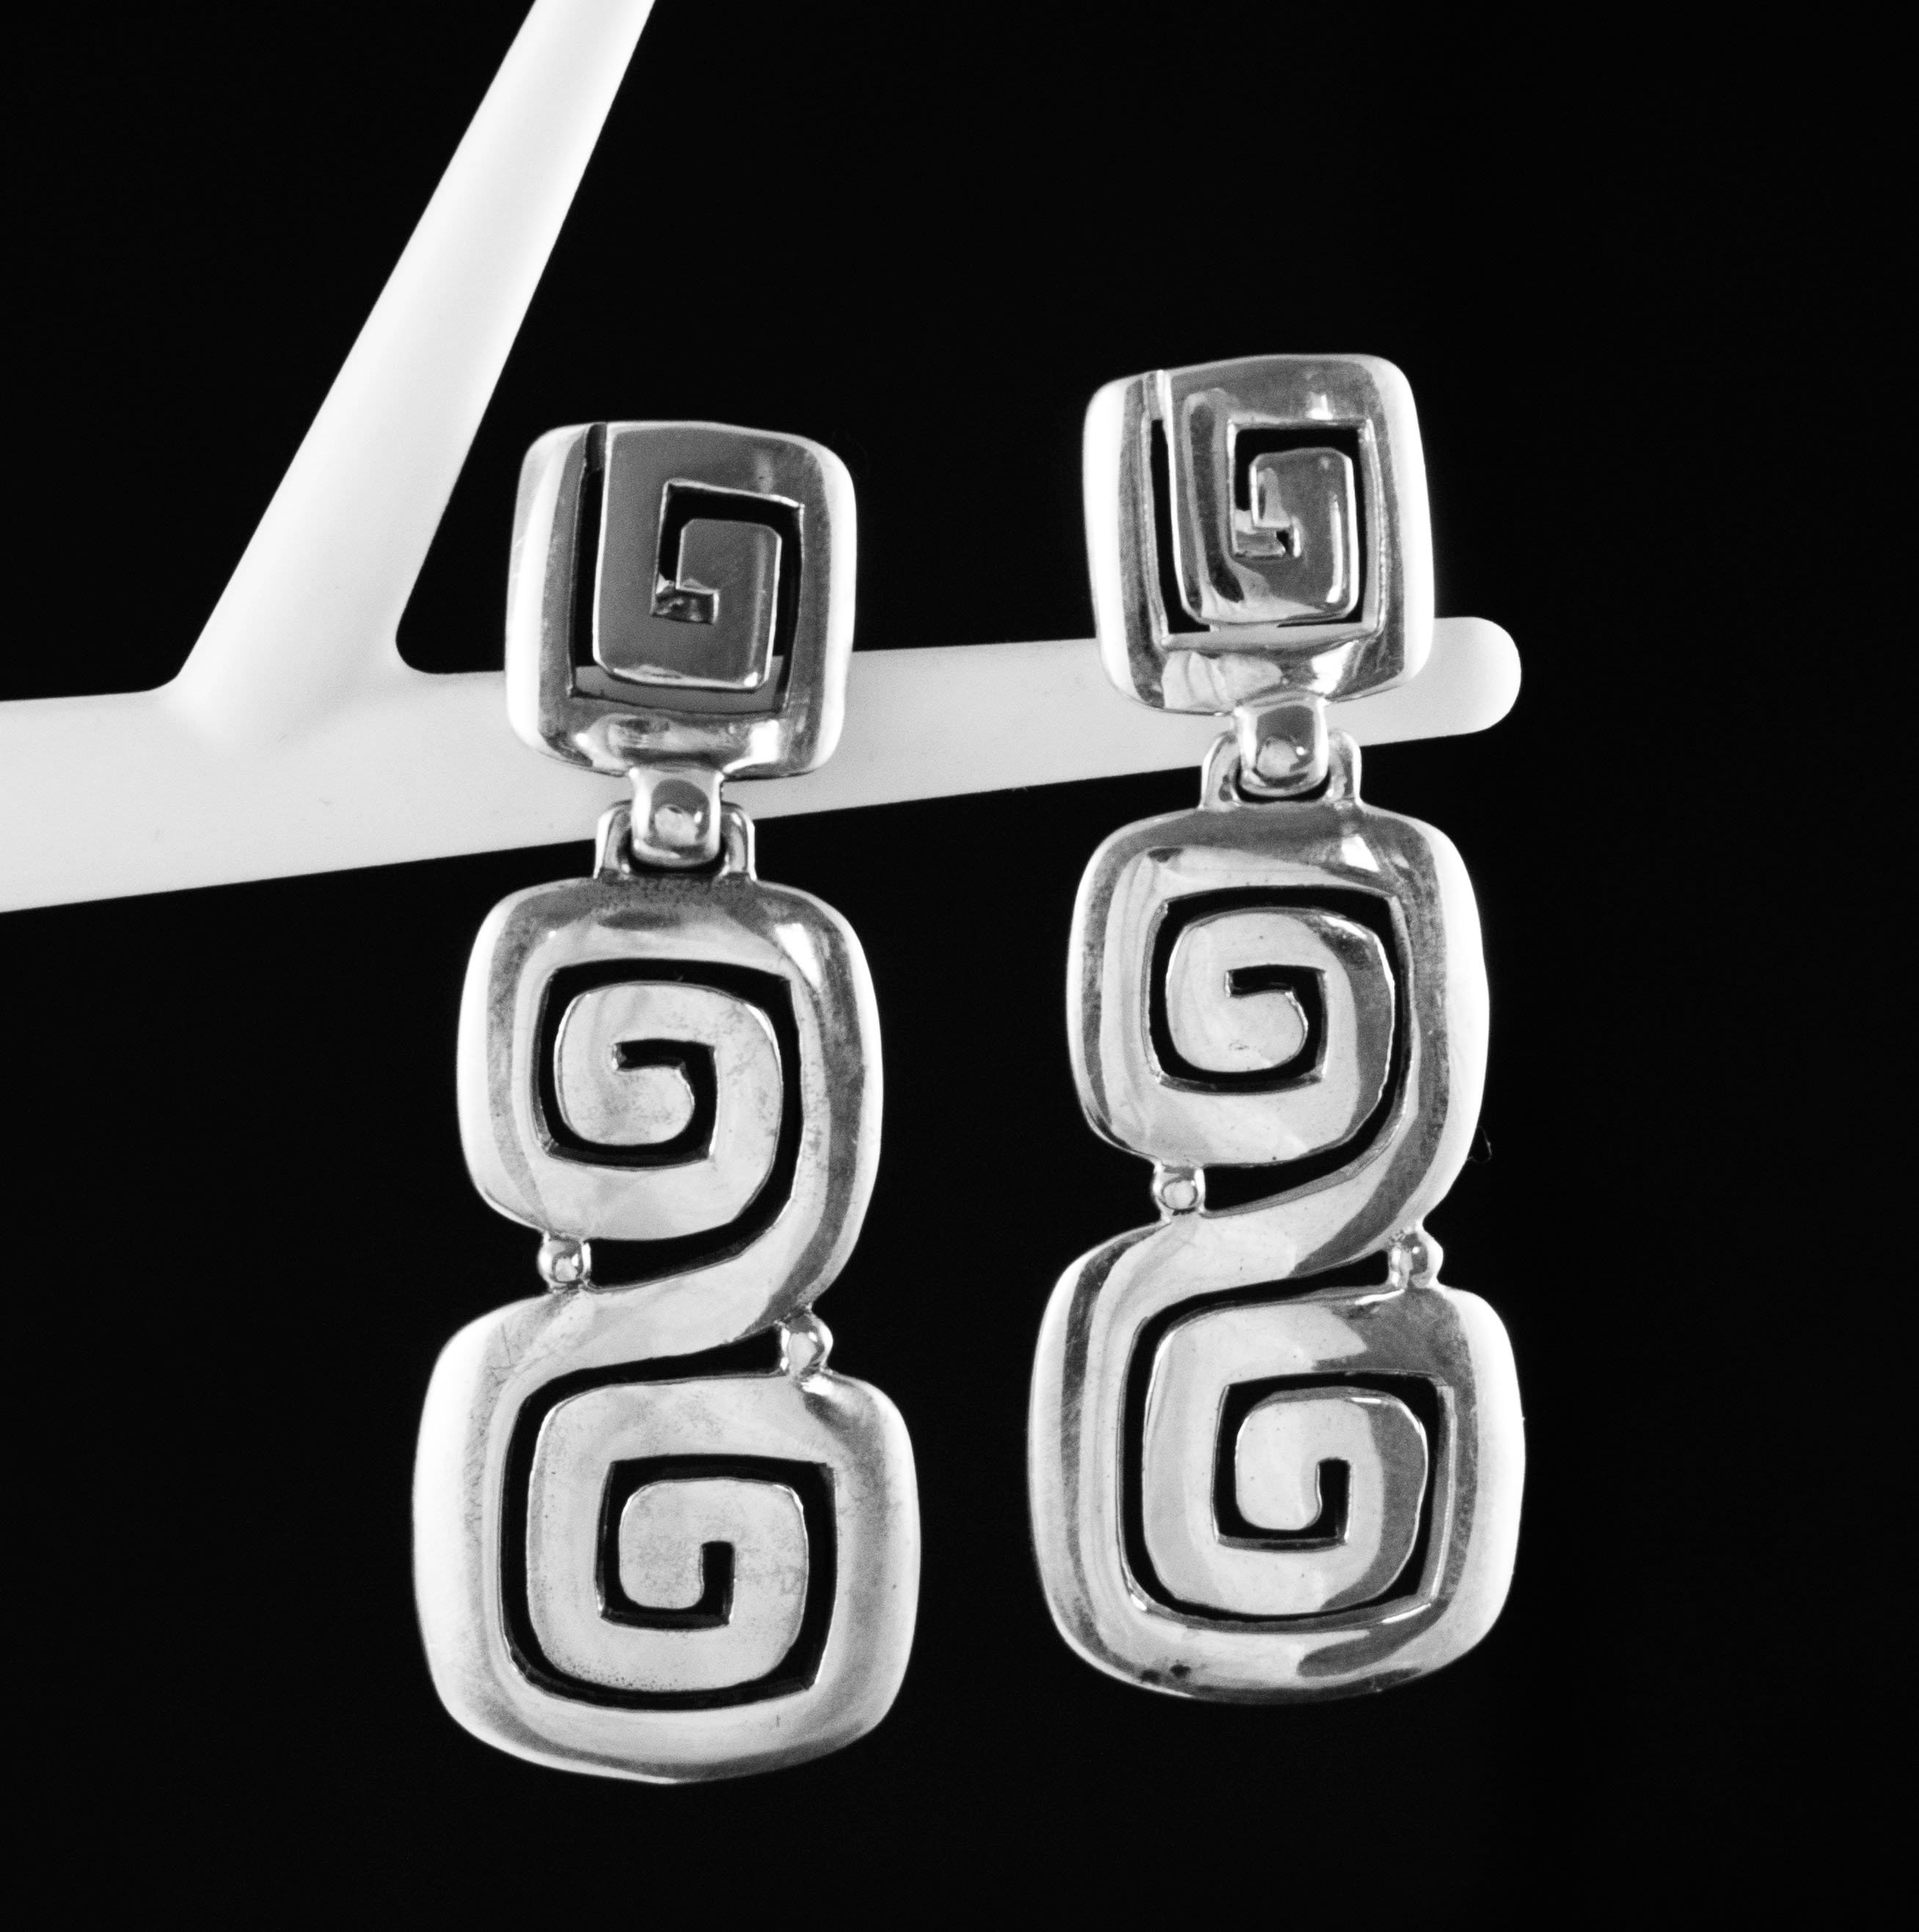 Meander Greek Key Handcrafted Silver Earrings-Meandros-Symbol Of Infinity & Unity-Ancient Motif-Crete